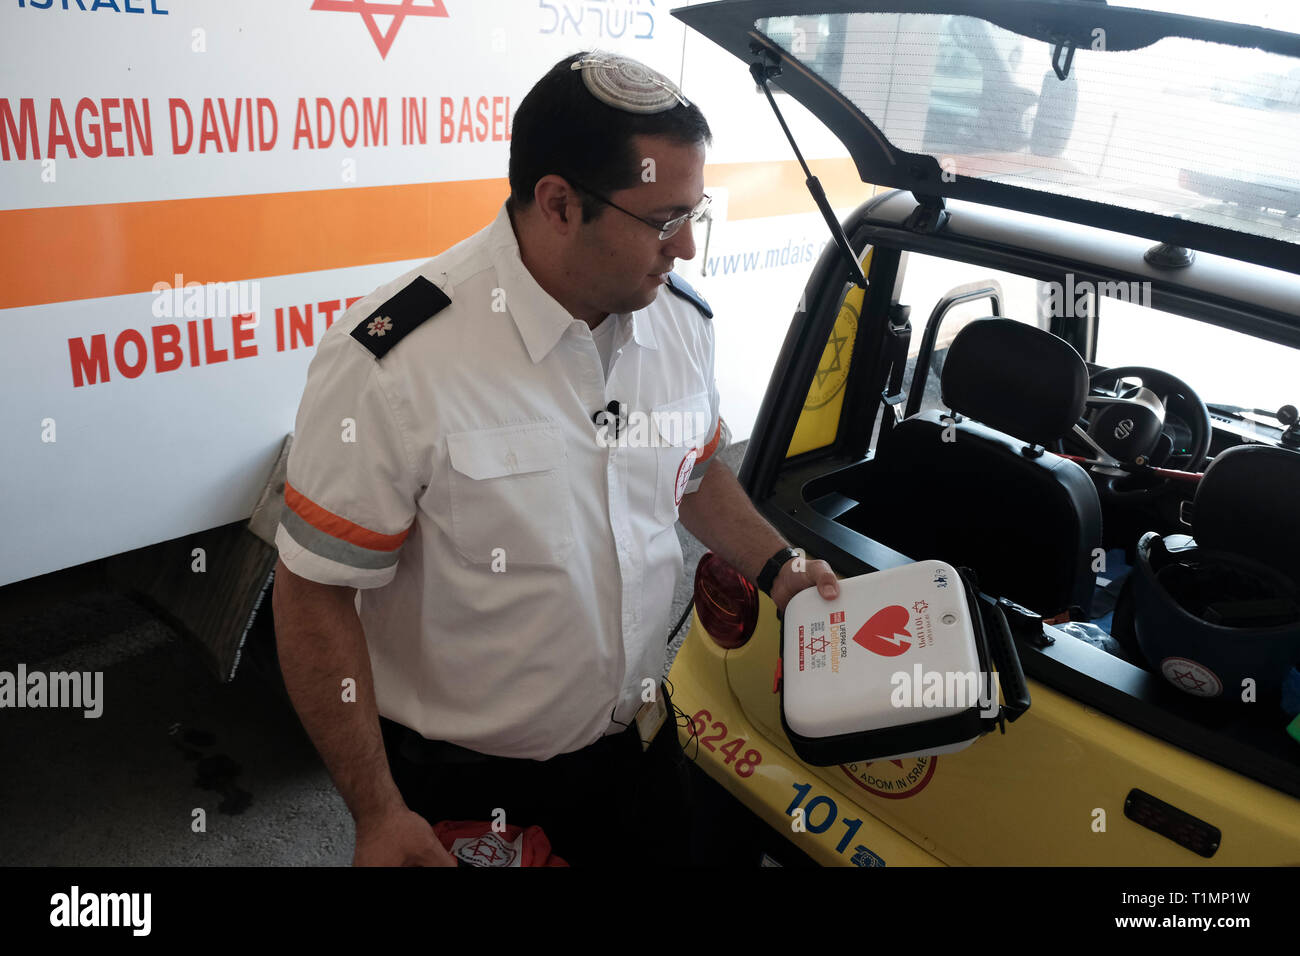 Manager of department of 'Magen David Adom' Israel's national emergency medical service holds a portable defibrillation device for treatment of life-threatening cardiac dysrhythmias. Stock Photo